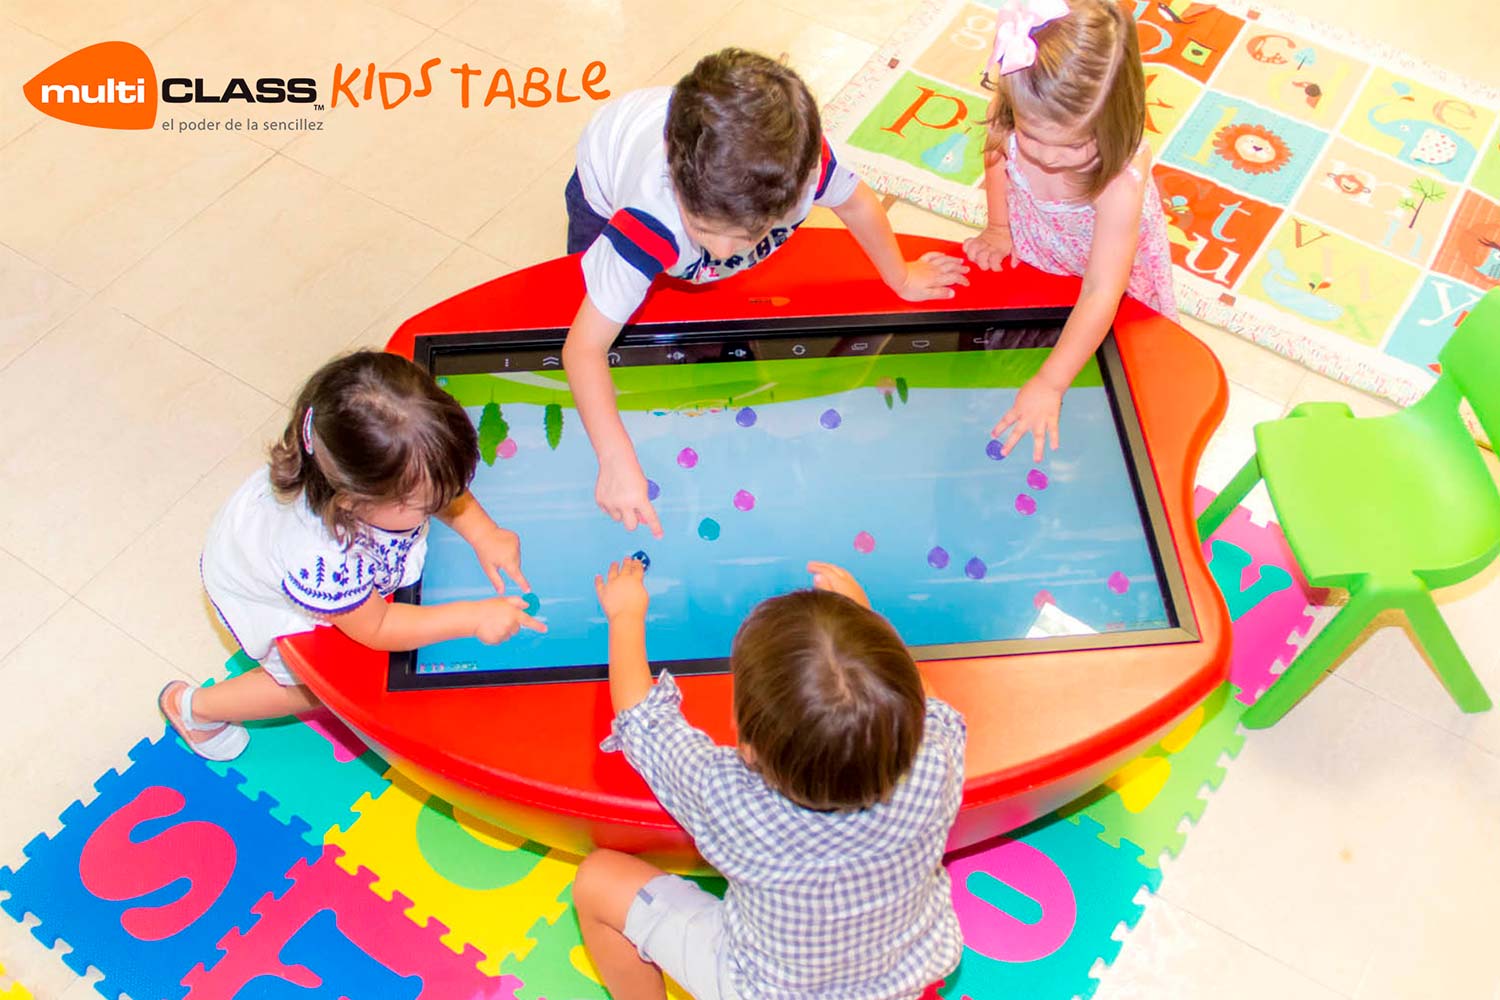 Touchscreen table multiCLASS Kids Table education